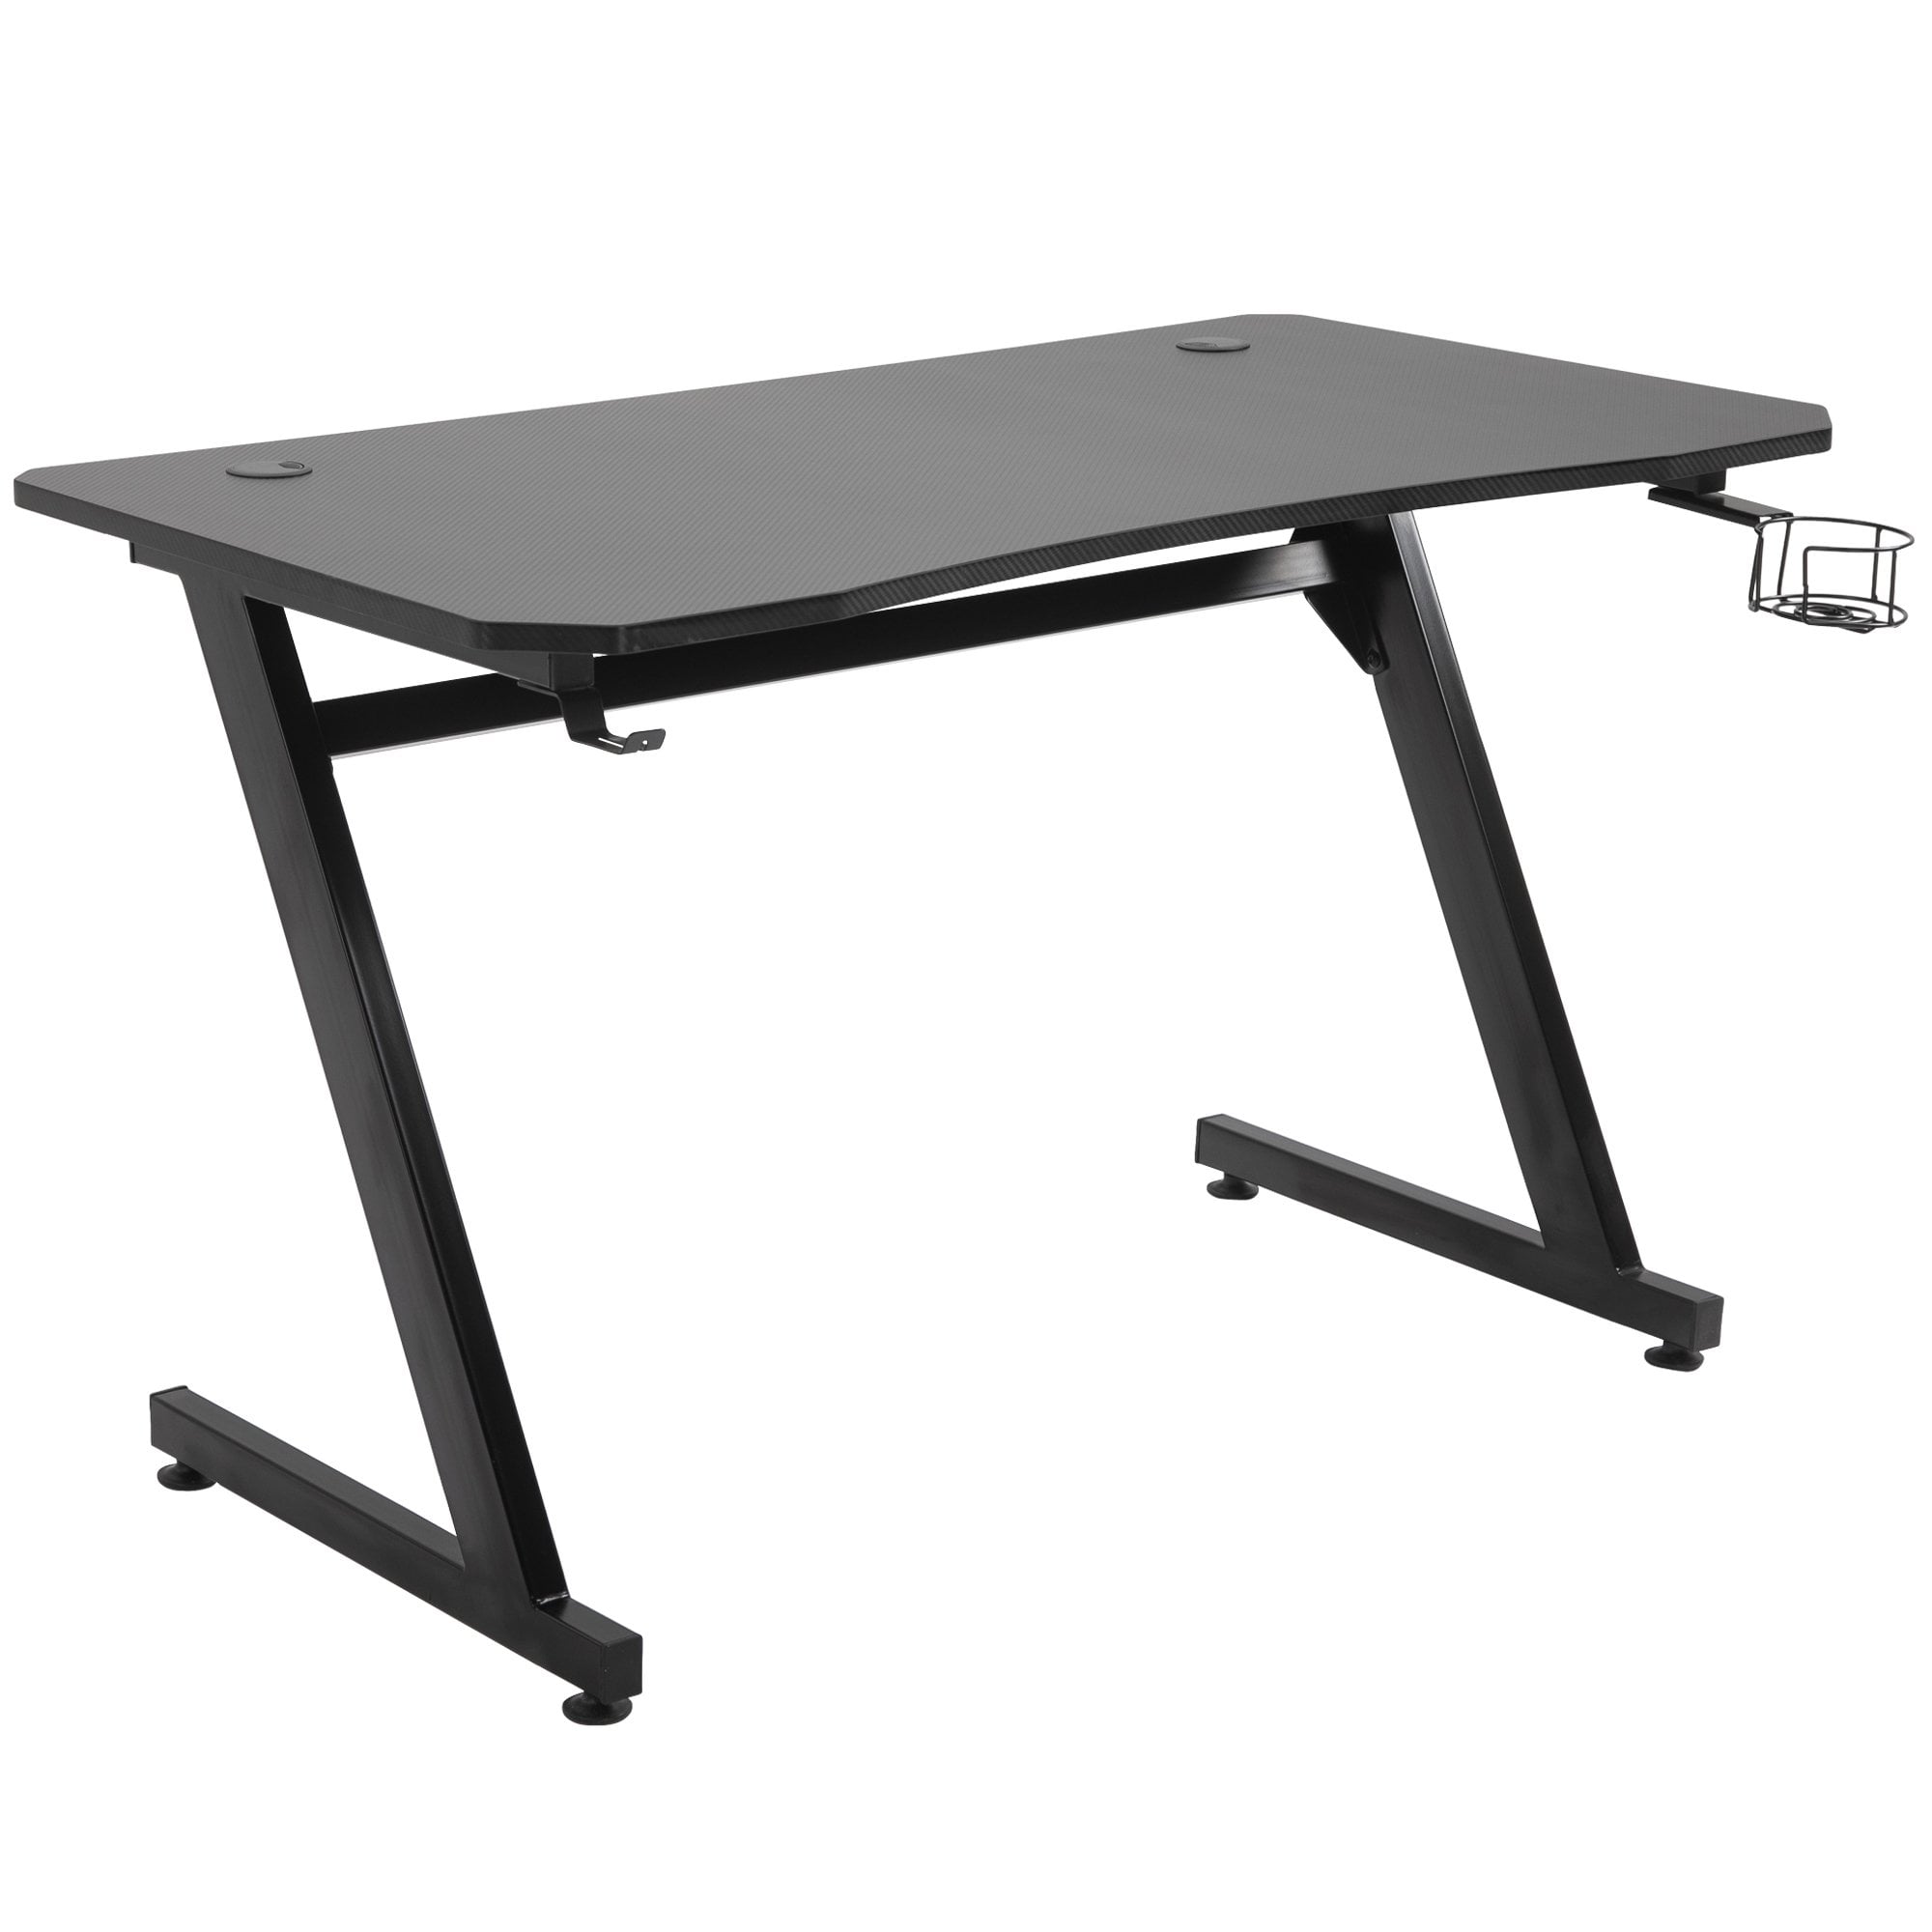 Steel Frame Gaming Desk Writing Table Workstations for Home and Office w/ Cup Headphone Holder Adjustable Feet Black - CARTER  | TJ Hughes